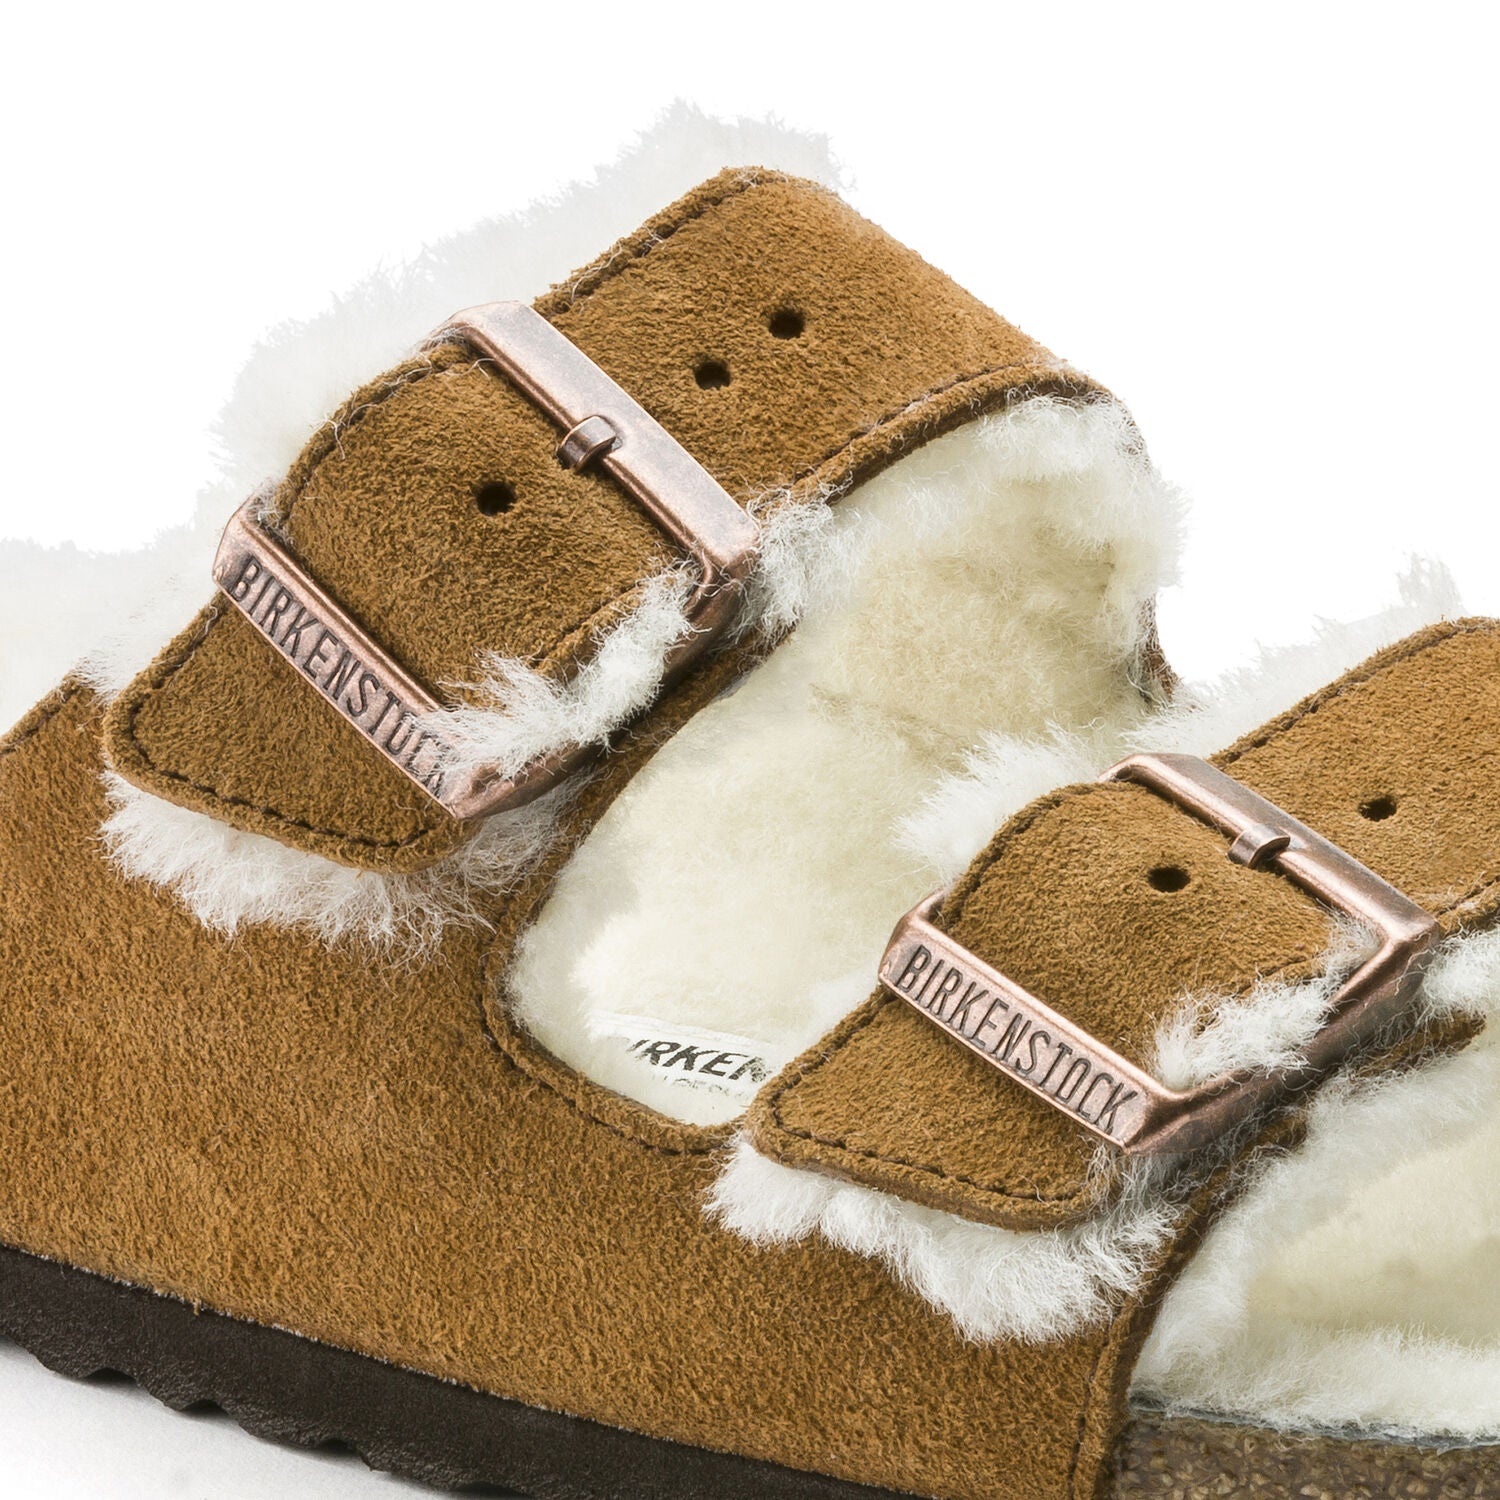 Arizona Suede Leather/Shearling in Mink